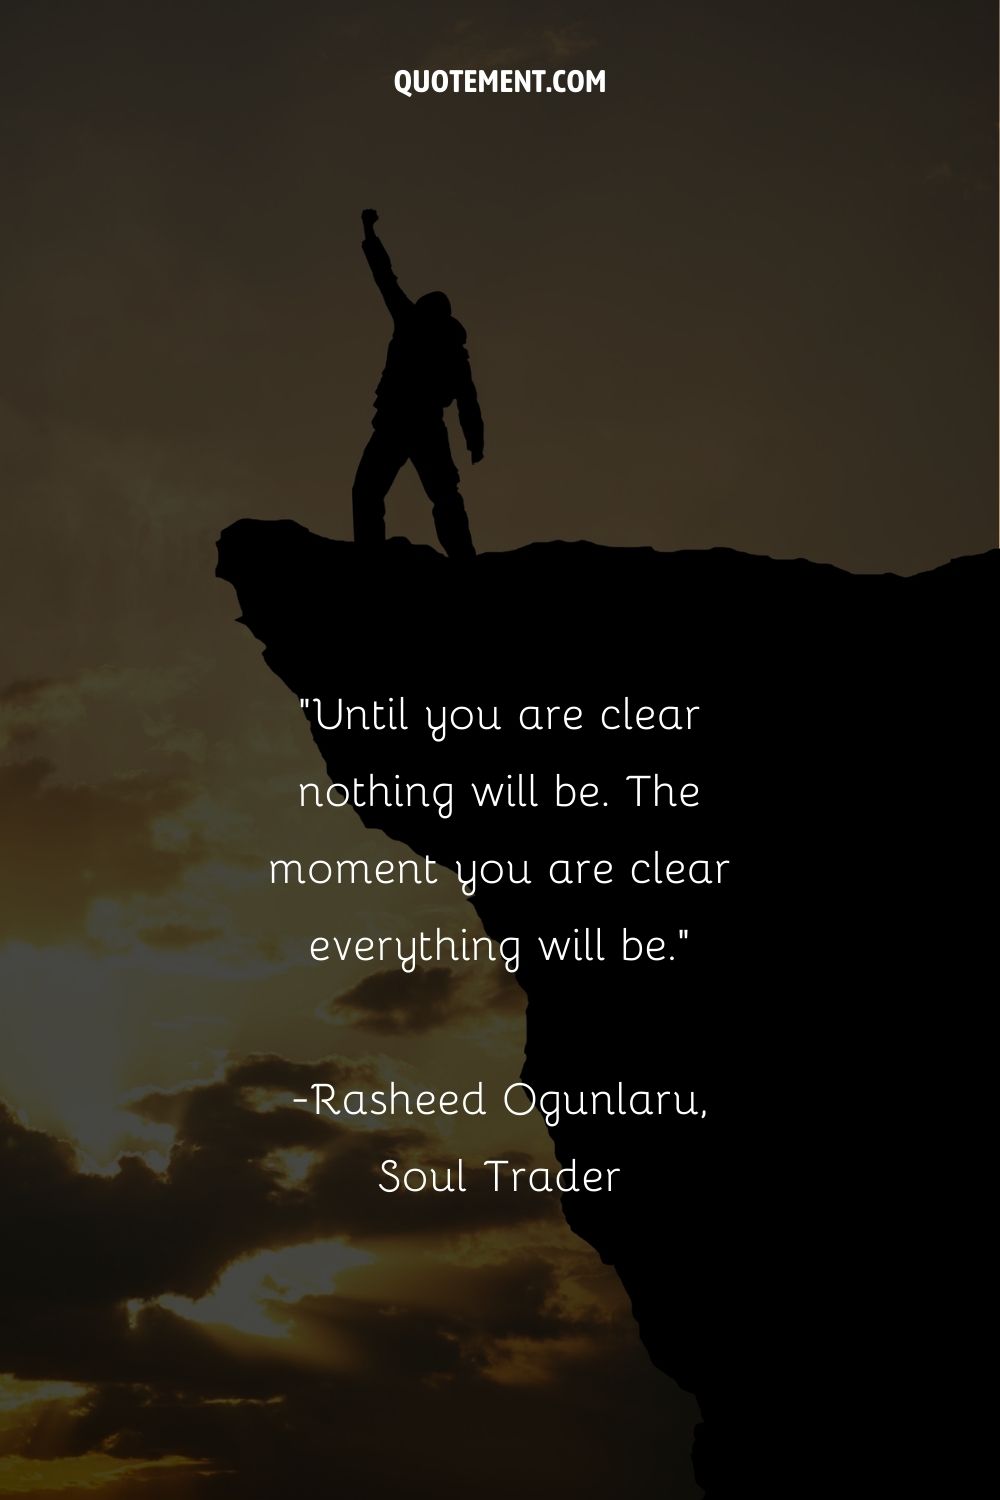 Until you are clear nothing will be. The moment you are clear everything will be